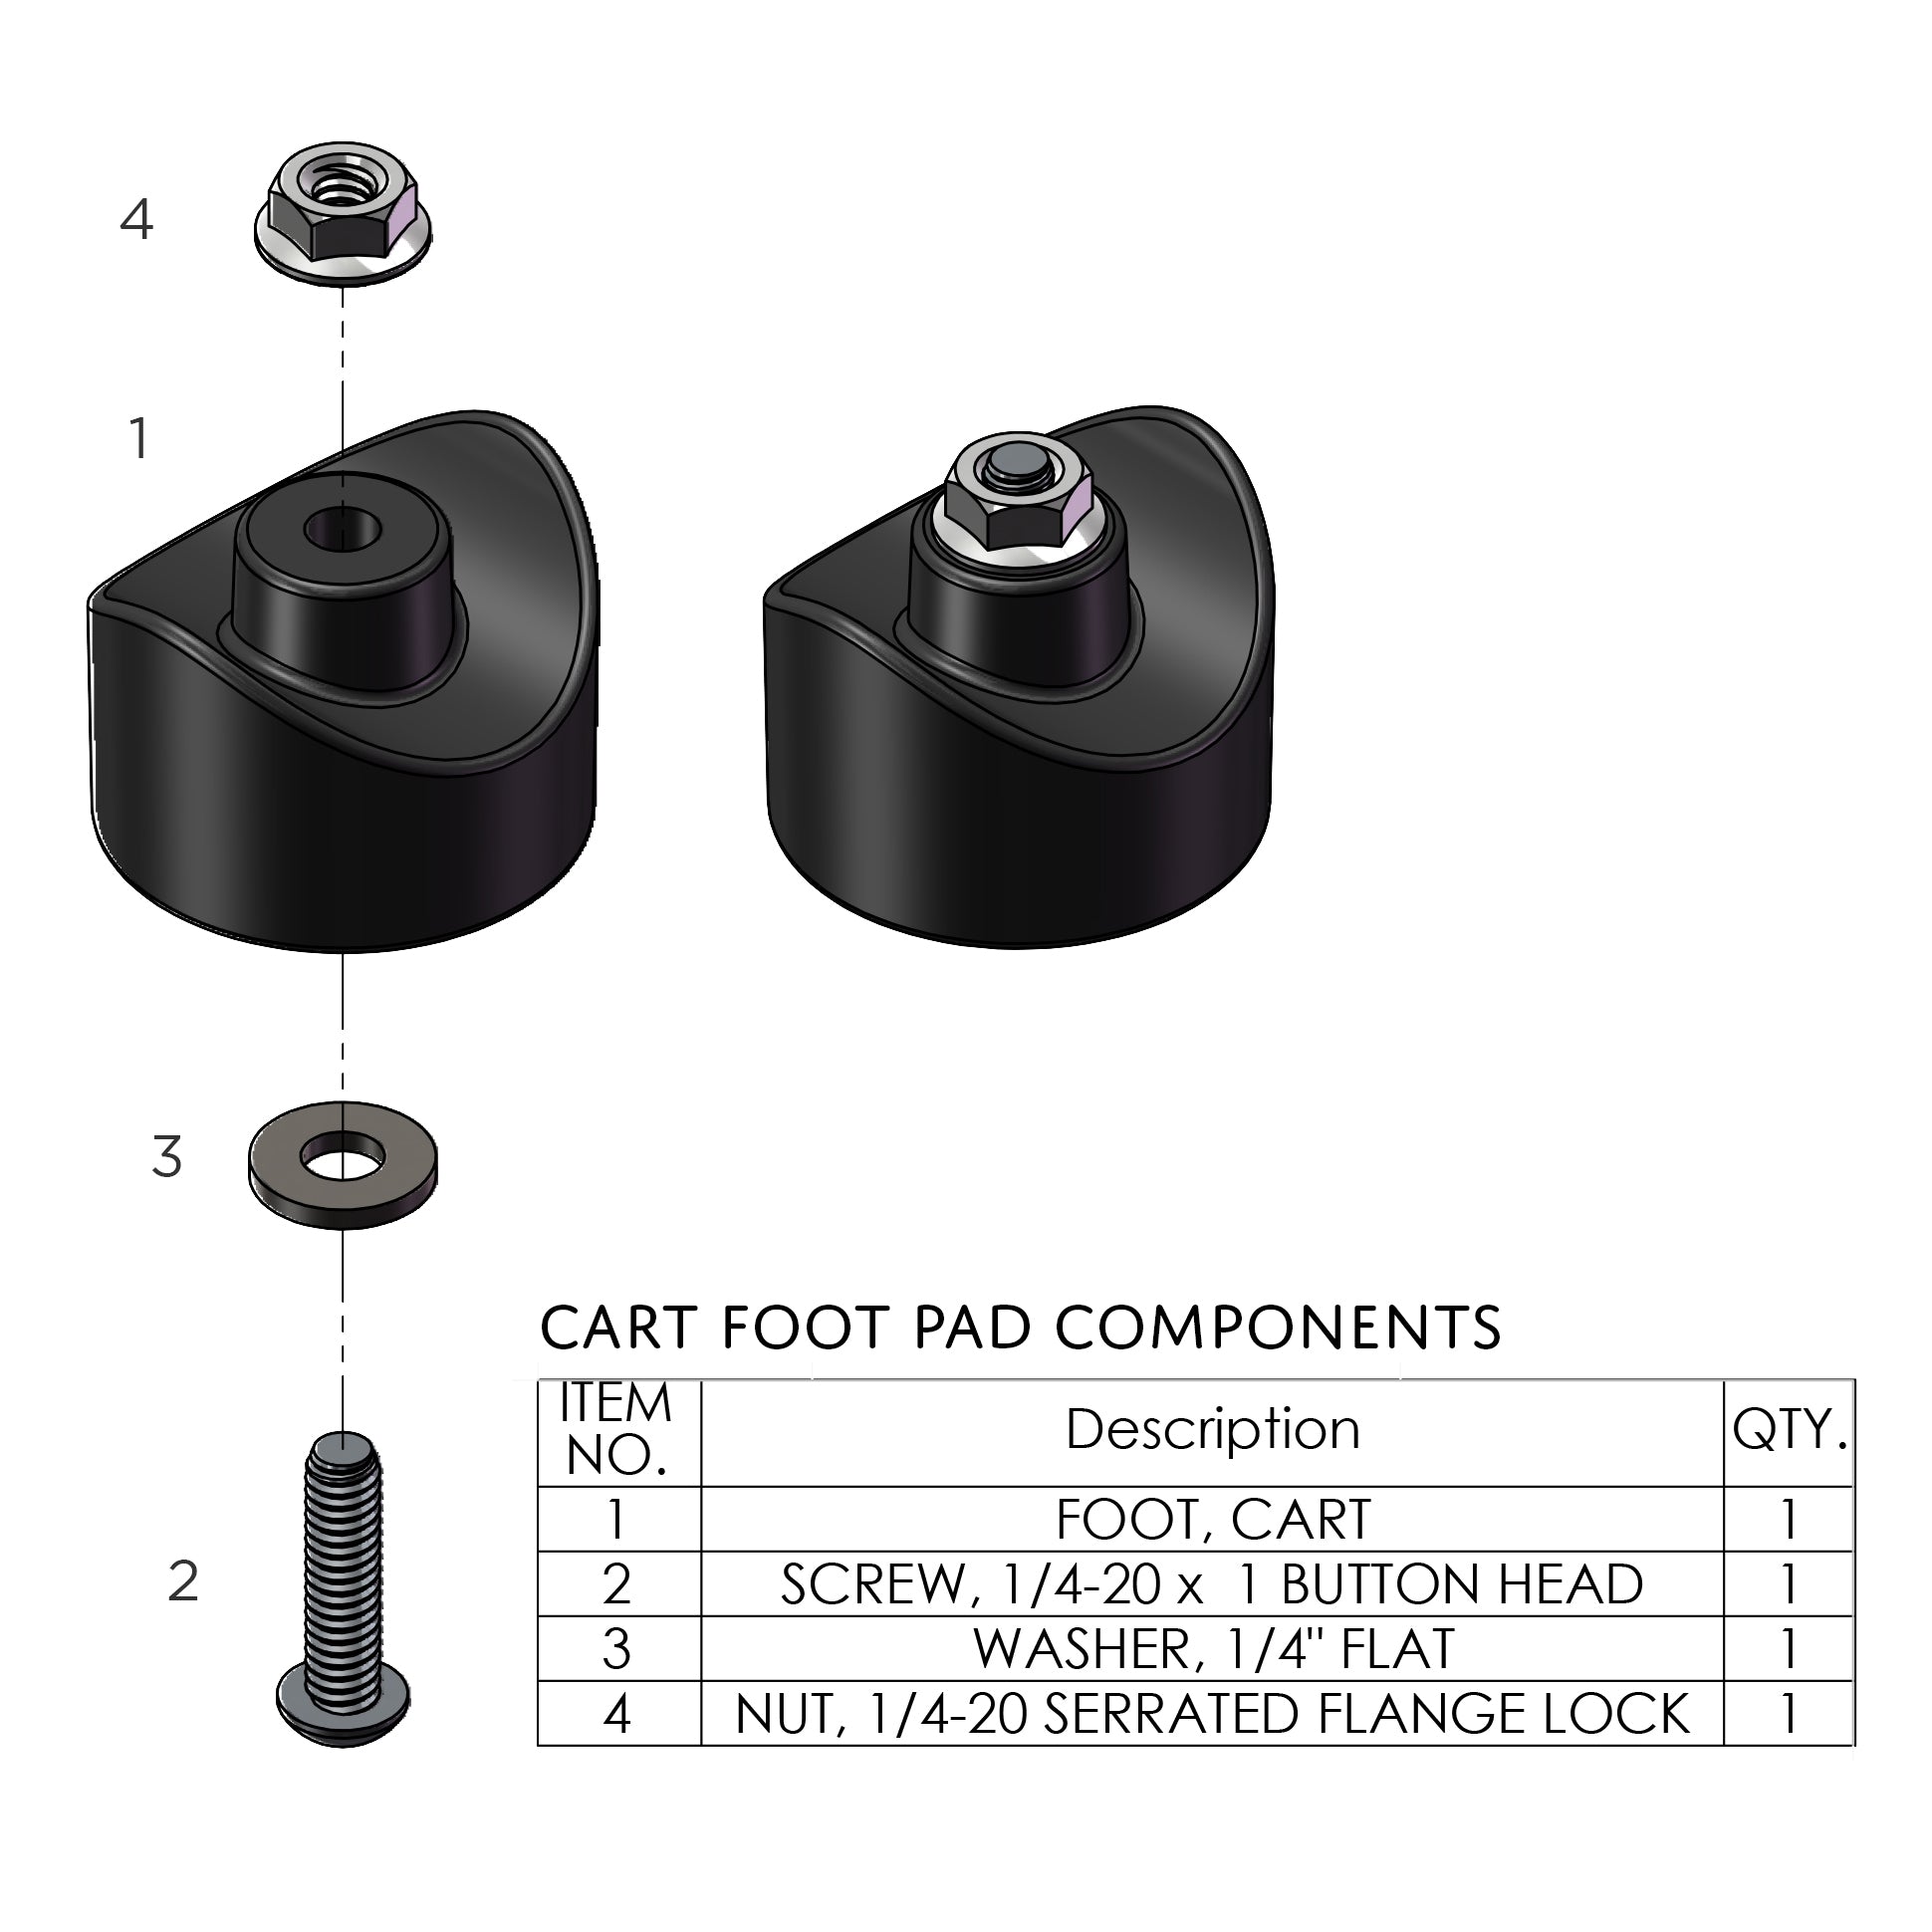 Exploded view of Eley cart rubber foot pad